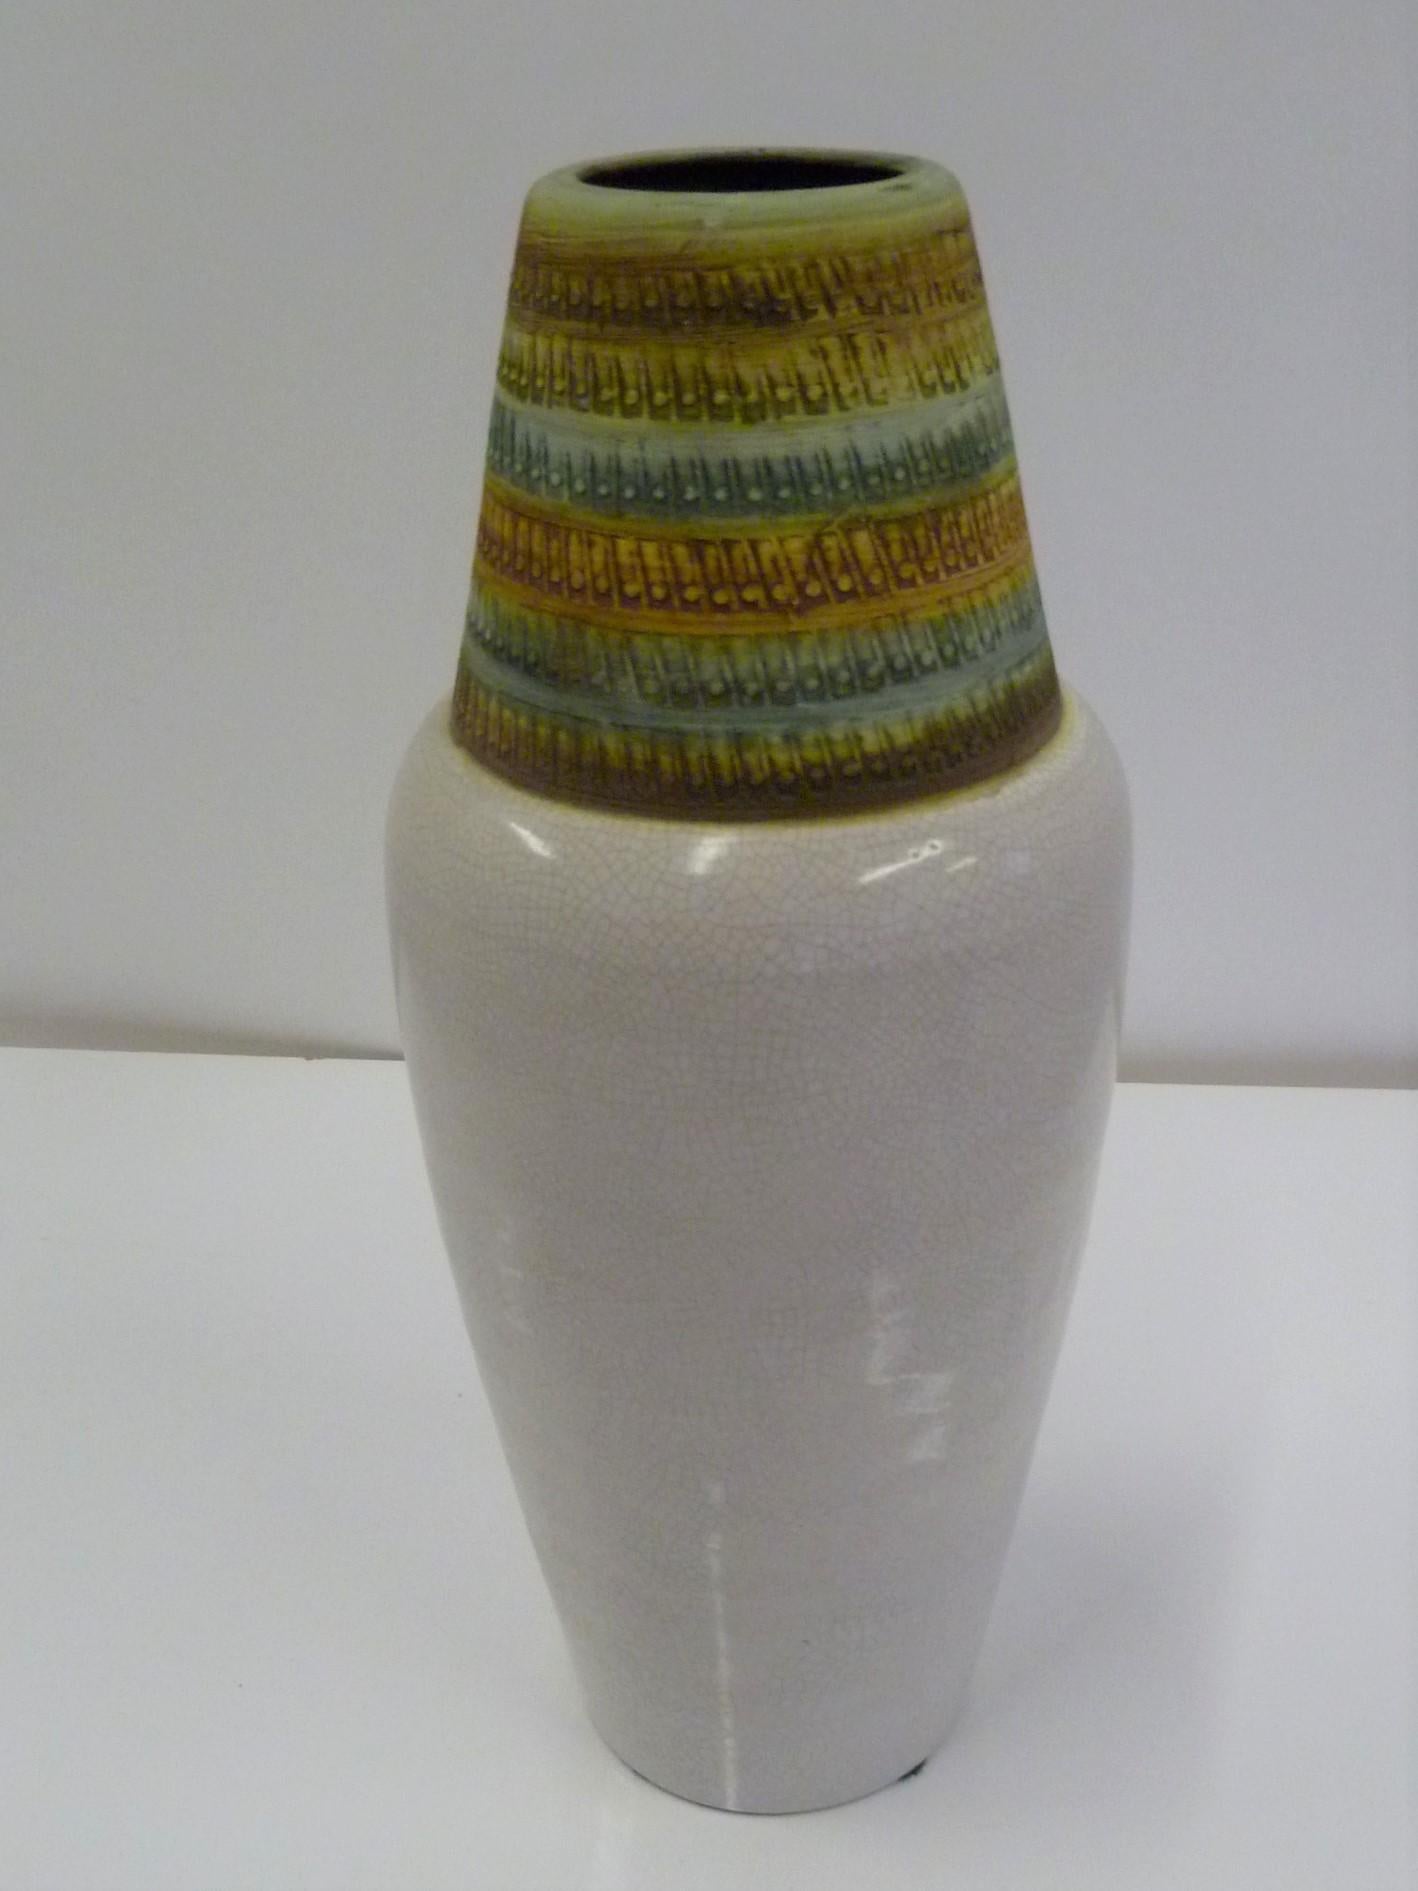 A 1960s import from Italy, this tall Bitossi Vase was designed by Alvino Bagni and has a shouldered form with a fine craquelure creamy glaze on the bottom topped with a textural impressed conical head and mouth in matte glaze in green and mustard